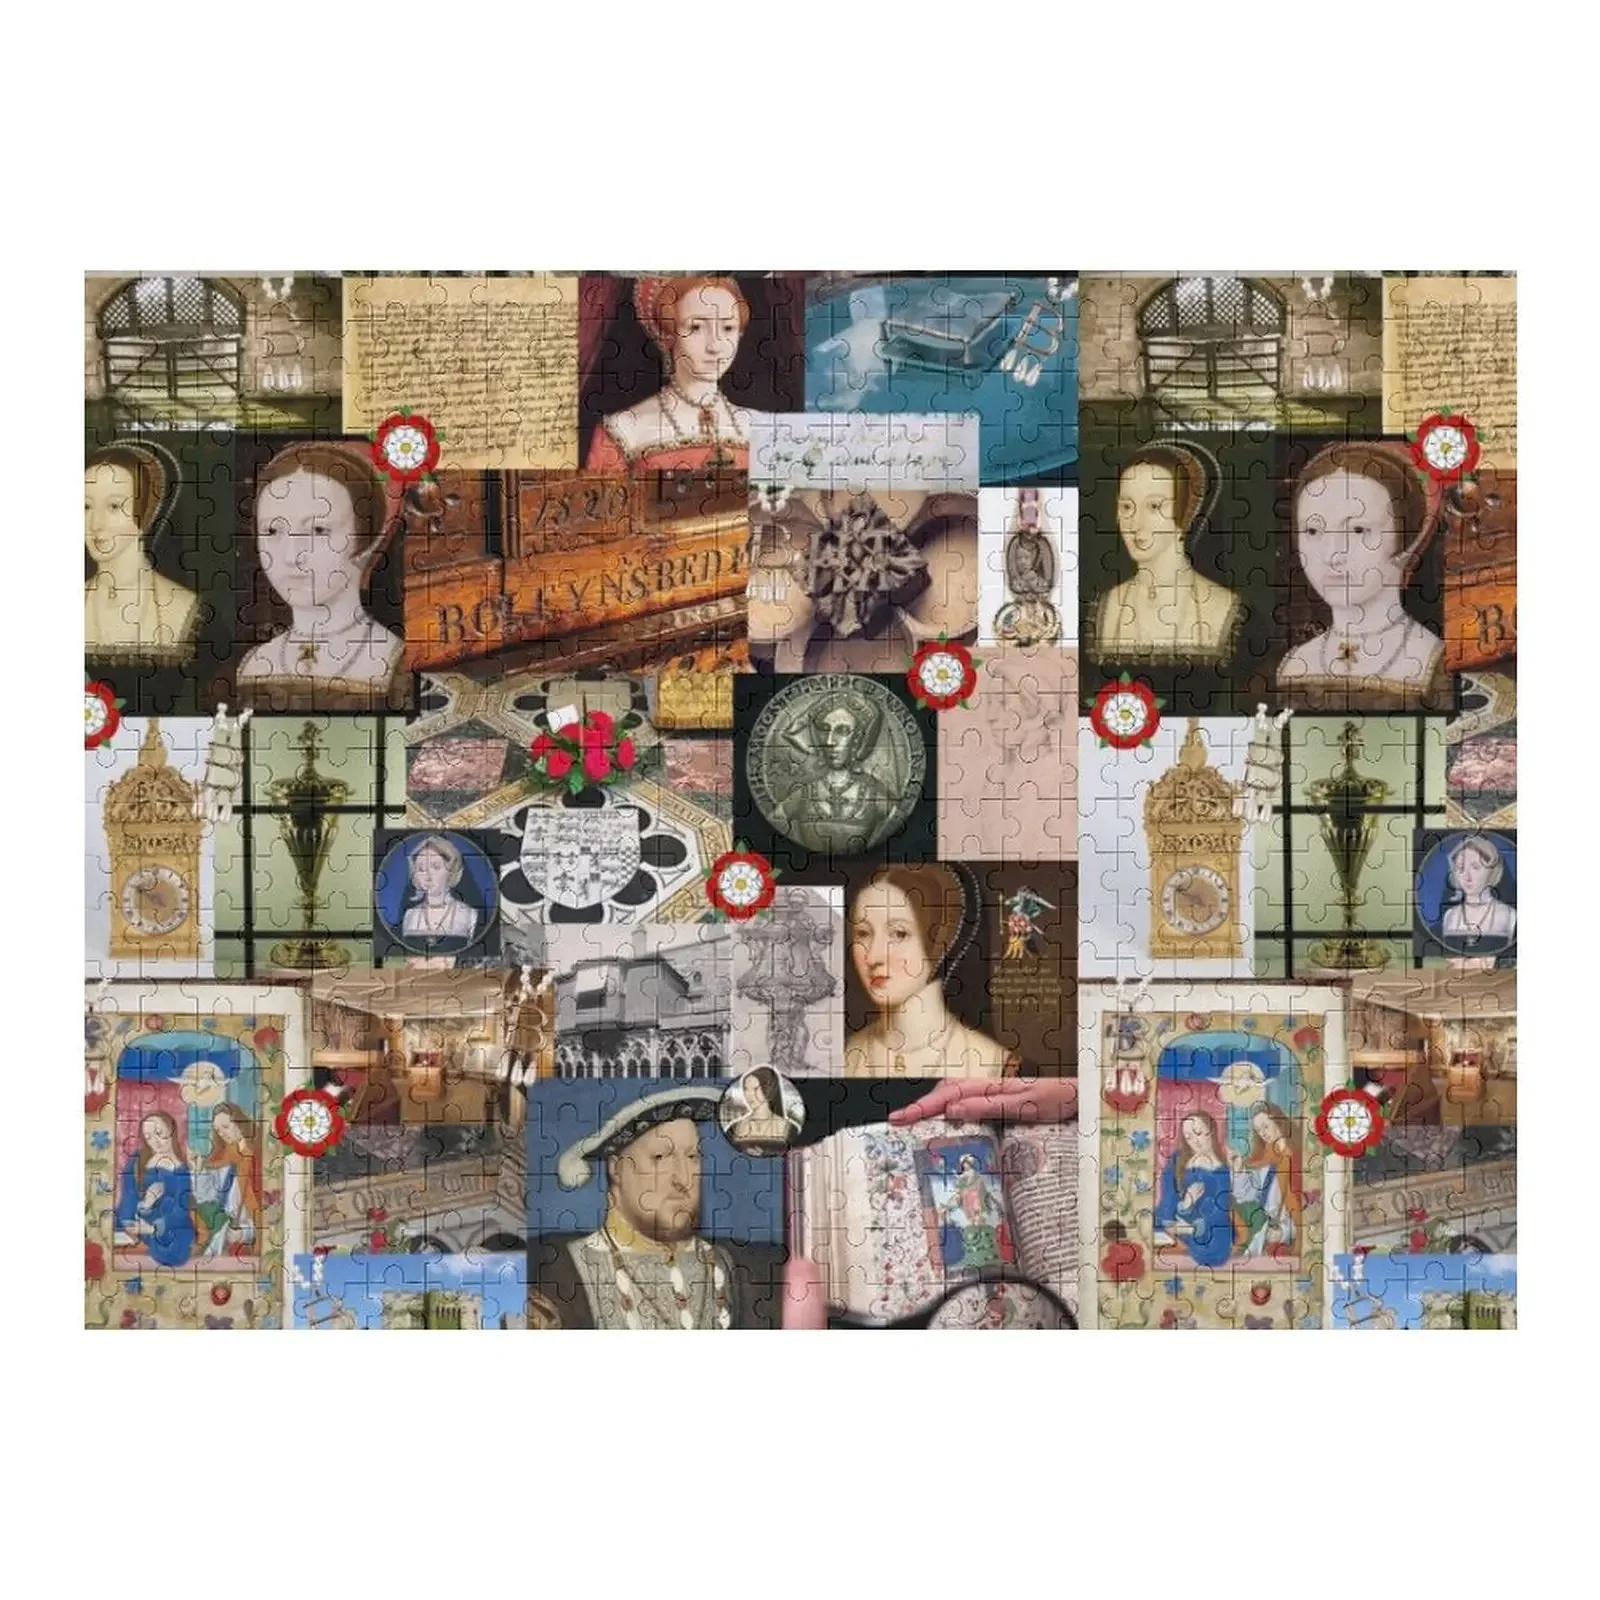 Anne Boleyn Collage Jigsaw Puzzle Woodens For Adults Wooden Decor Paintings Name Wooden Toy Puzzle christmas collage the classics jigsaw puzzle personalized gift ideas wooden jigsaws for adults personalised toys puzzle